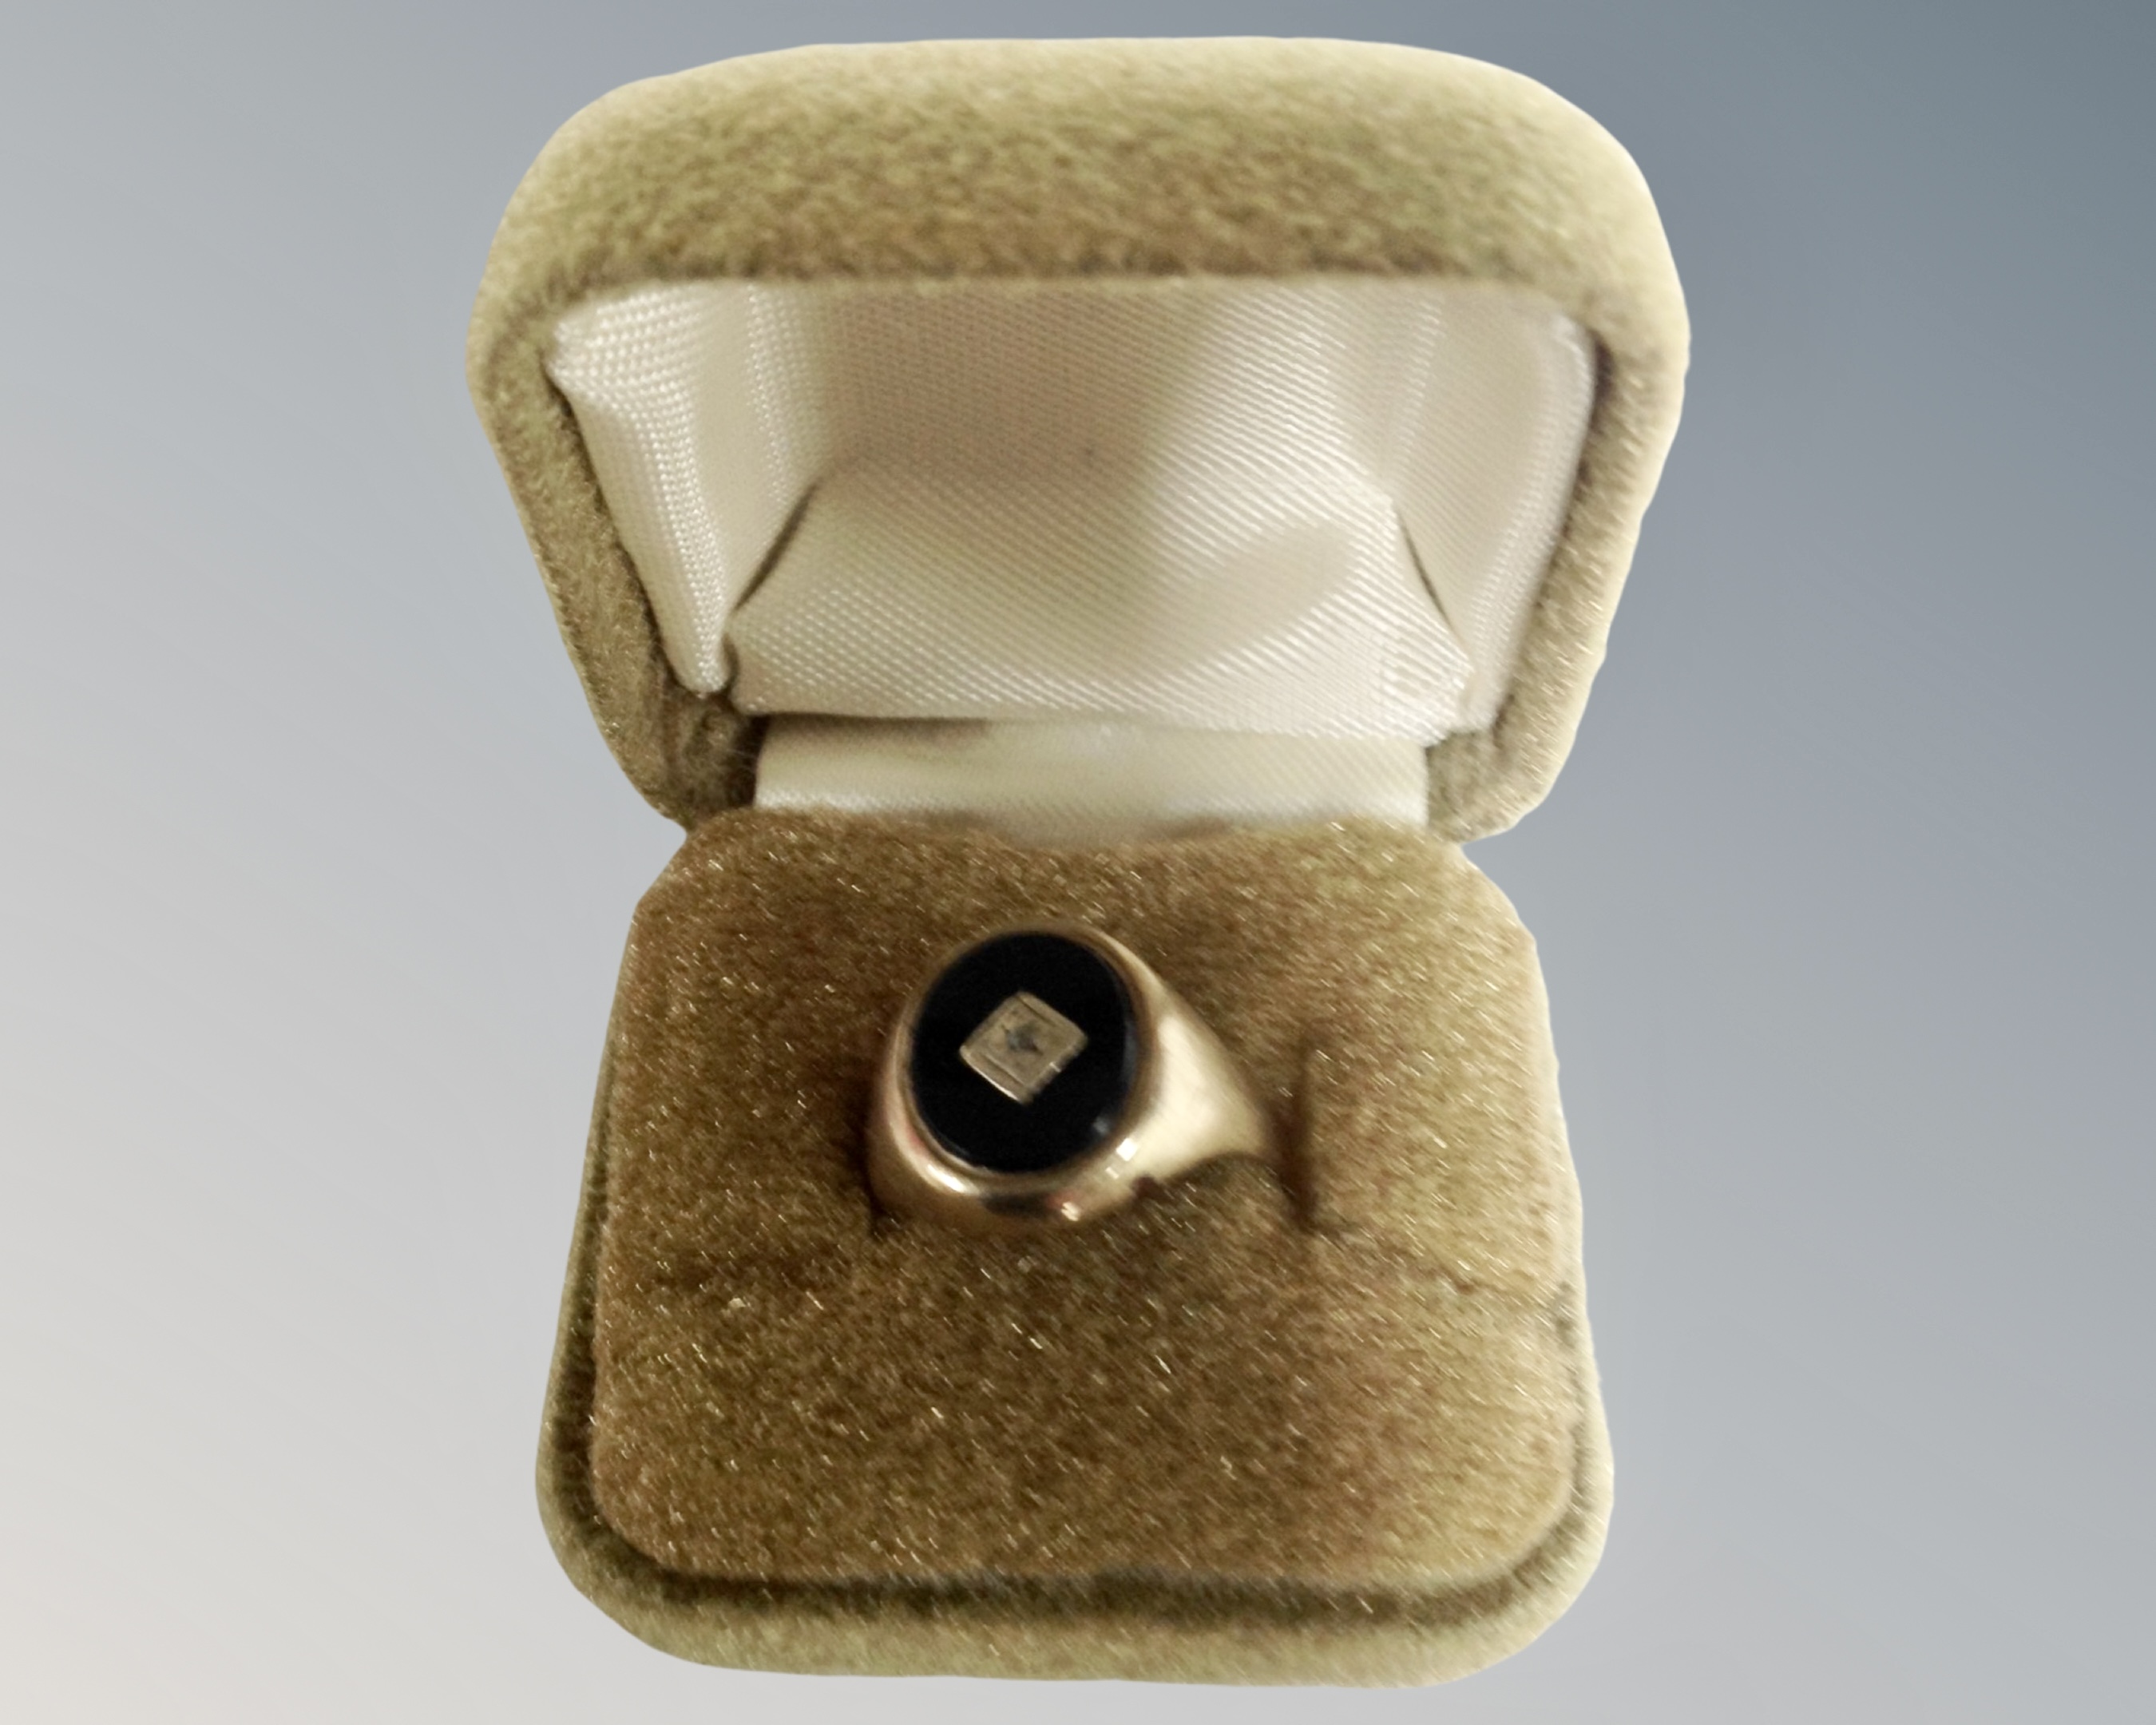 A gent's 9ct gold black onyx signet ring.